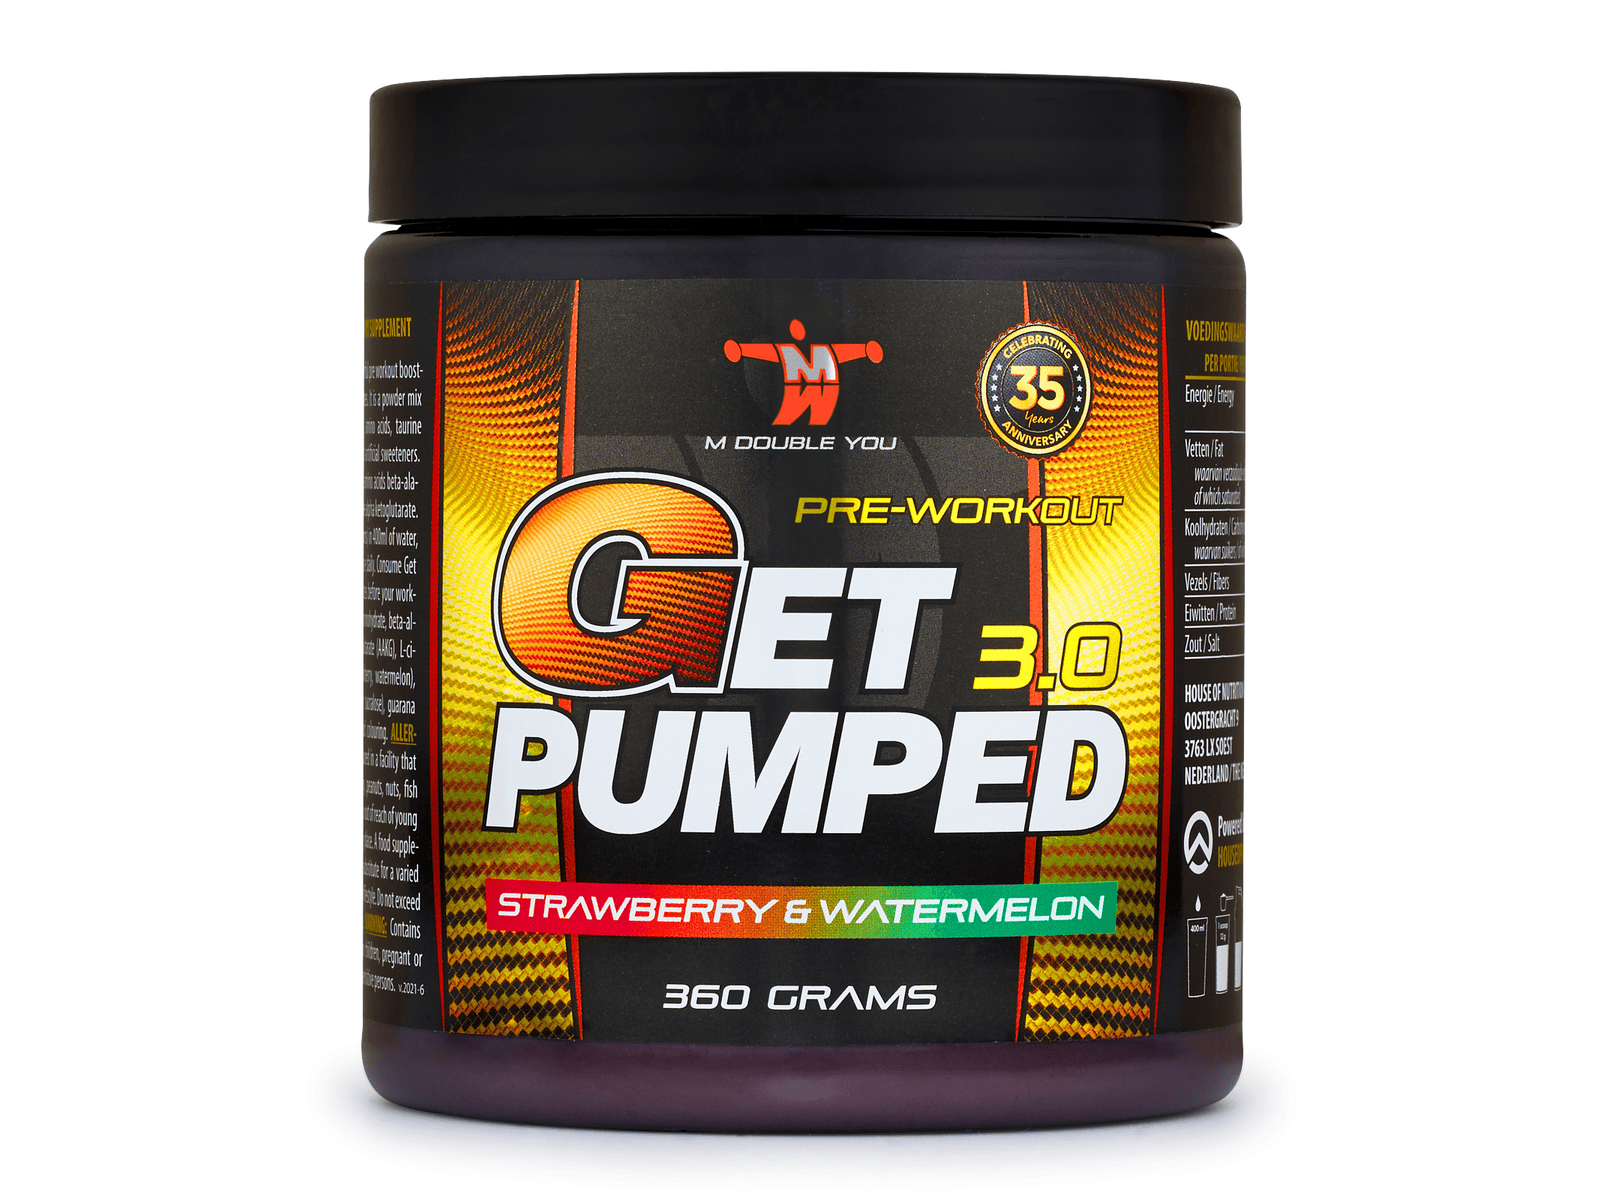 Get Pumped 3.0 Pre-Workout (Strawberry/Watermelon - 360 gram) - M DOUBLE YOU